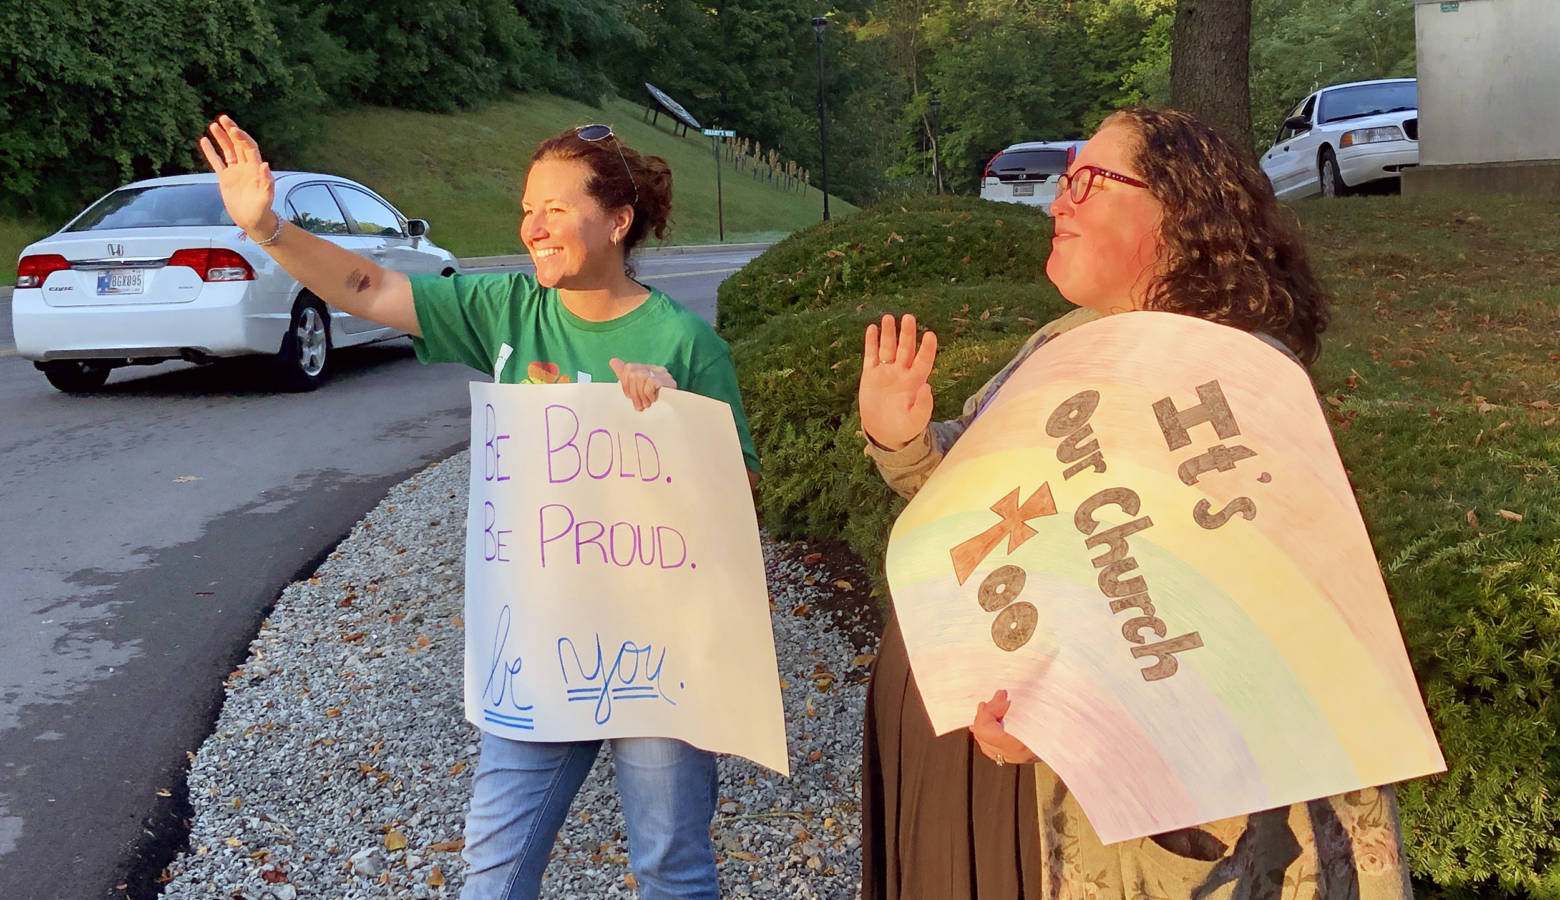 Shelly Fitzgerald waves to students entering Cathedral High School's campus. Fitzgerald was a guidance counselor as Roncalli High School before being put on administrative leave last year due to her same-sex marriage. (Darian Benson/WFYI)